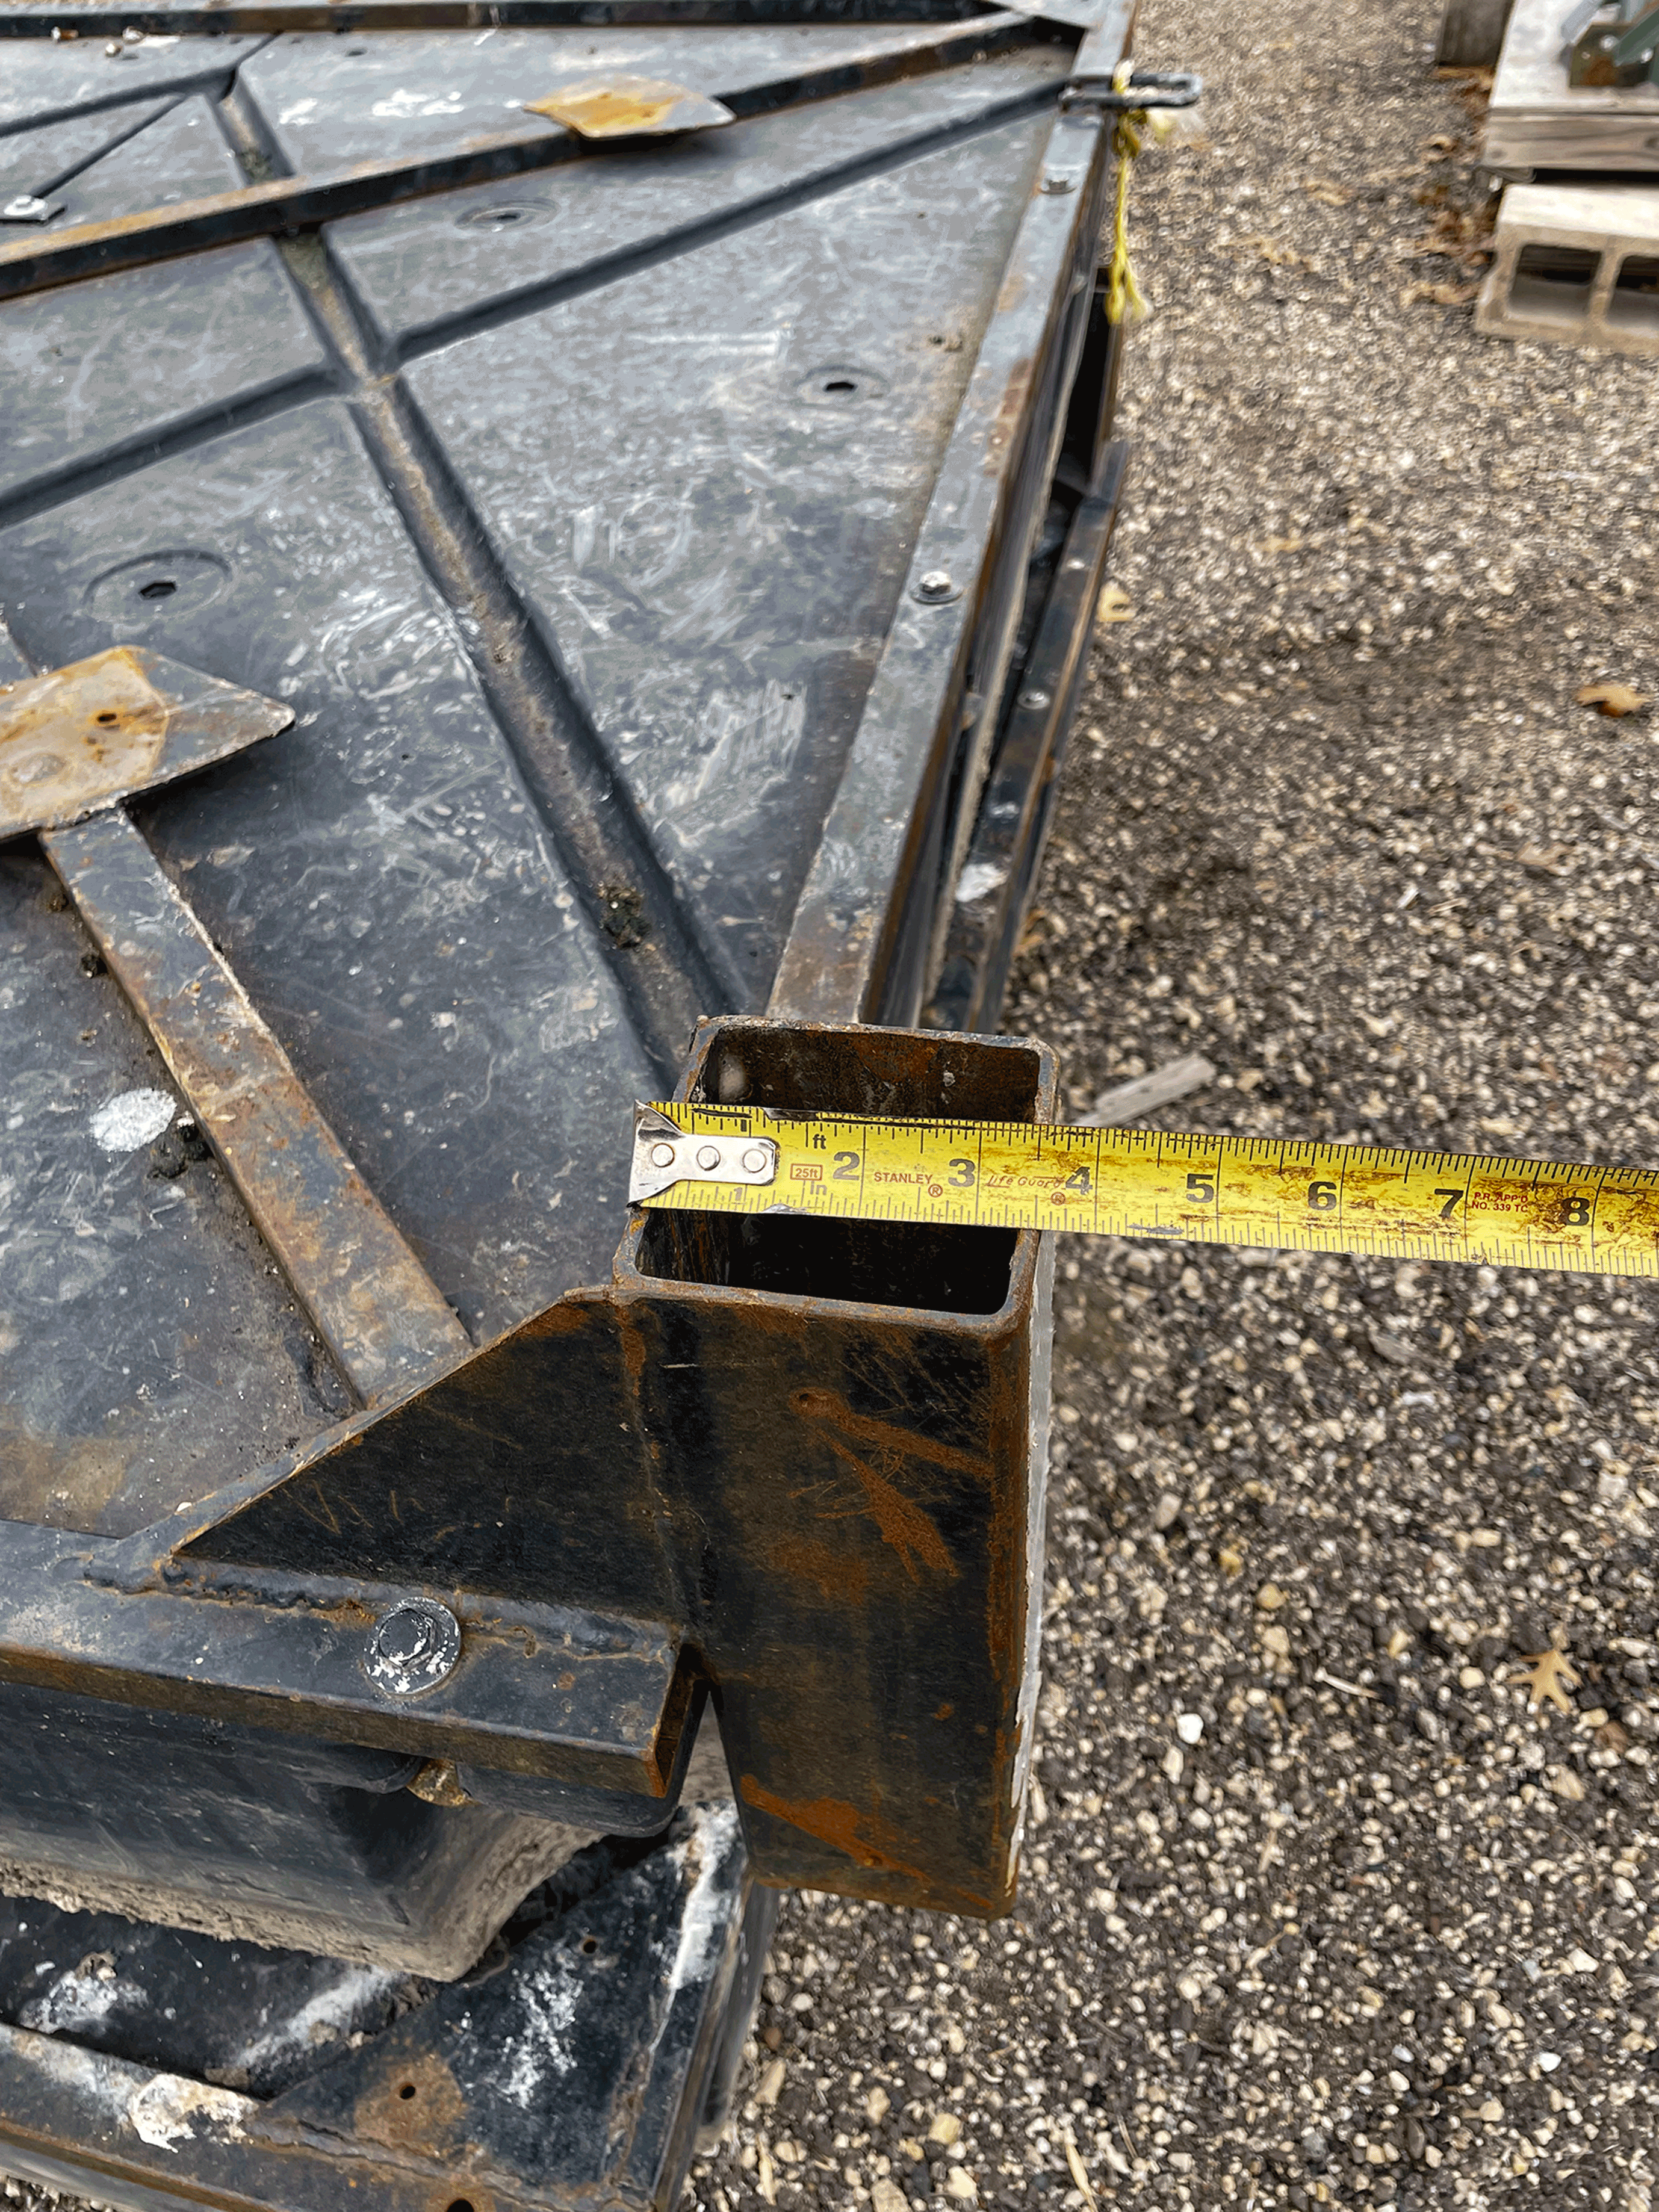 A tape measure placed over the metal support bracket indicates the widest part of
                        the bracket is about 3.5 inches.